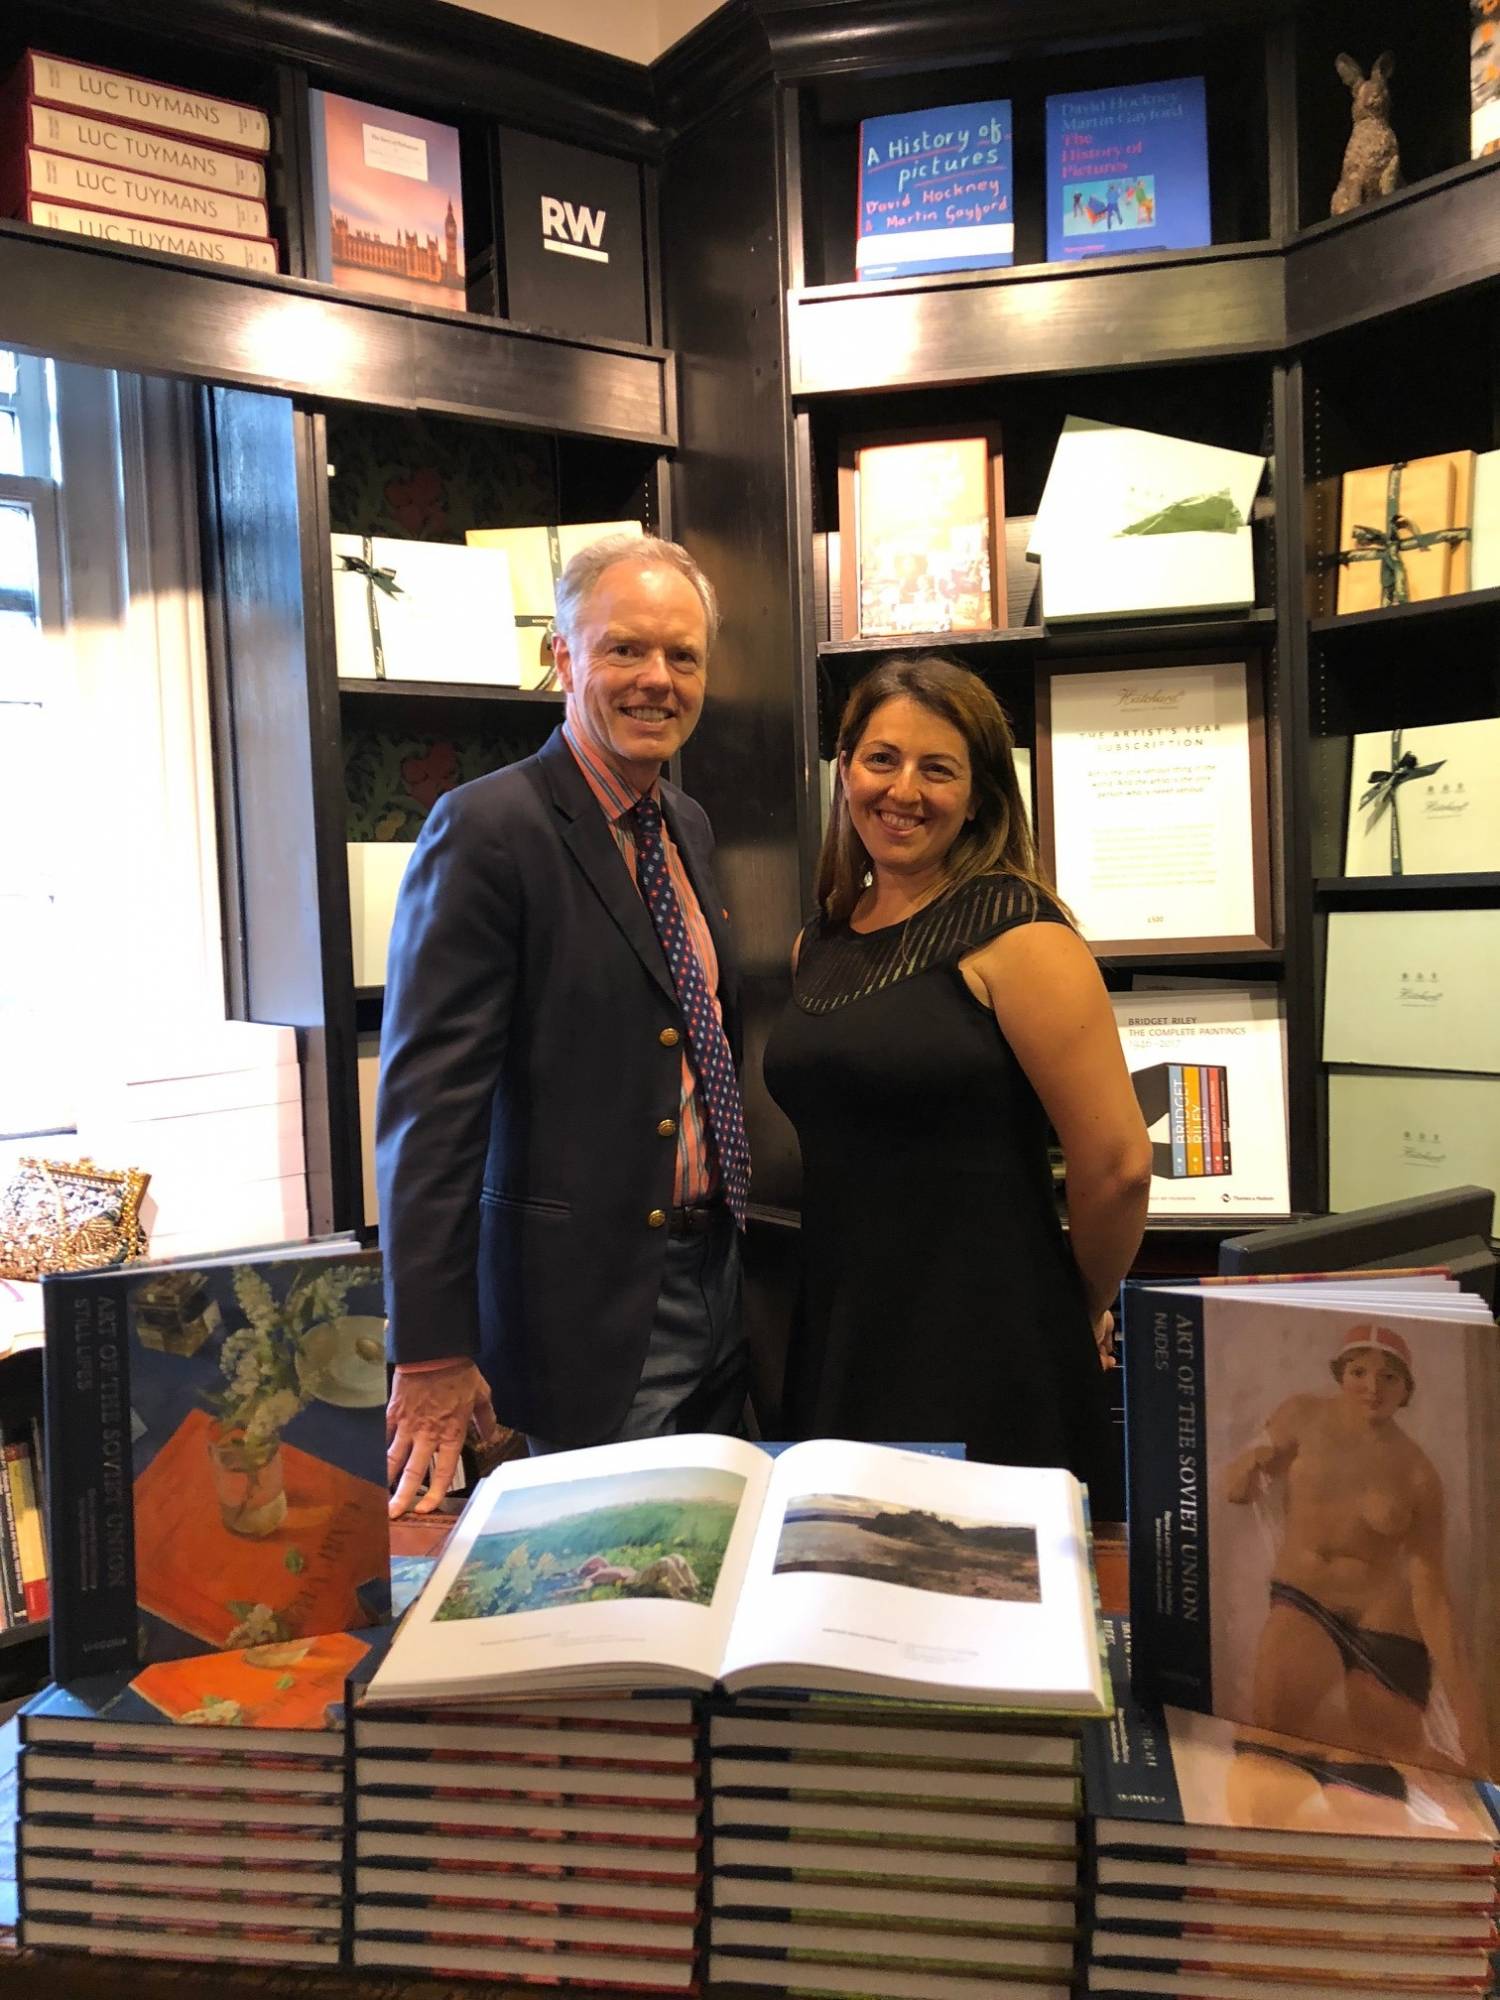 Ivan Lindsay and Rena Lavery at Hatchards at the book launch for The Art of Soviet Russia